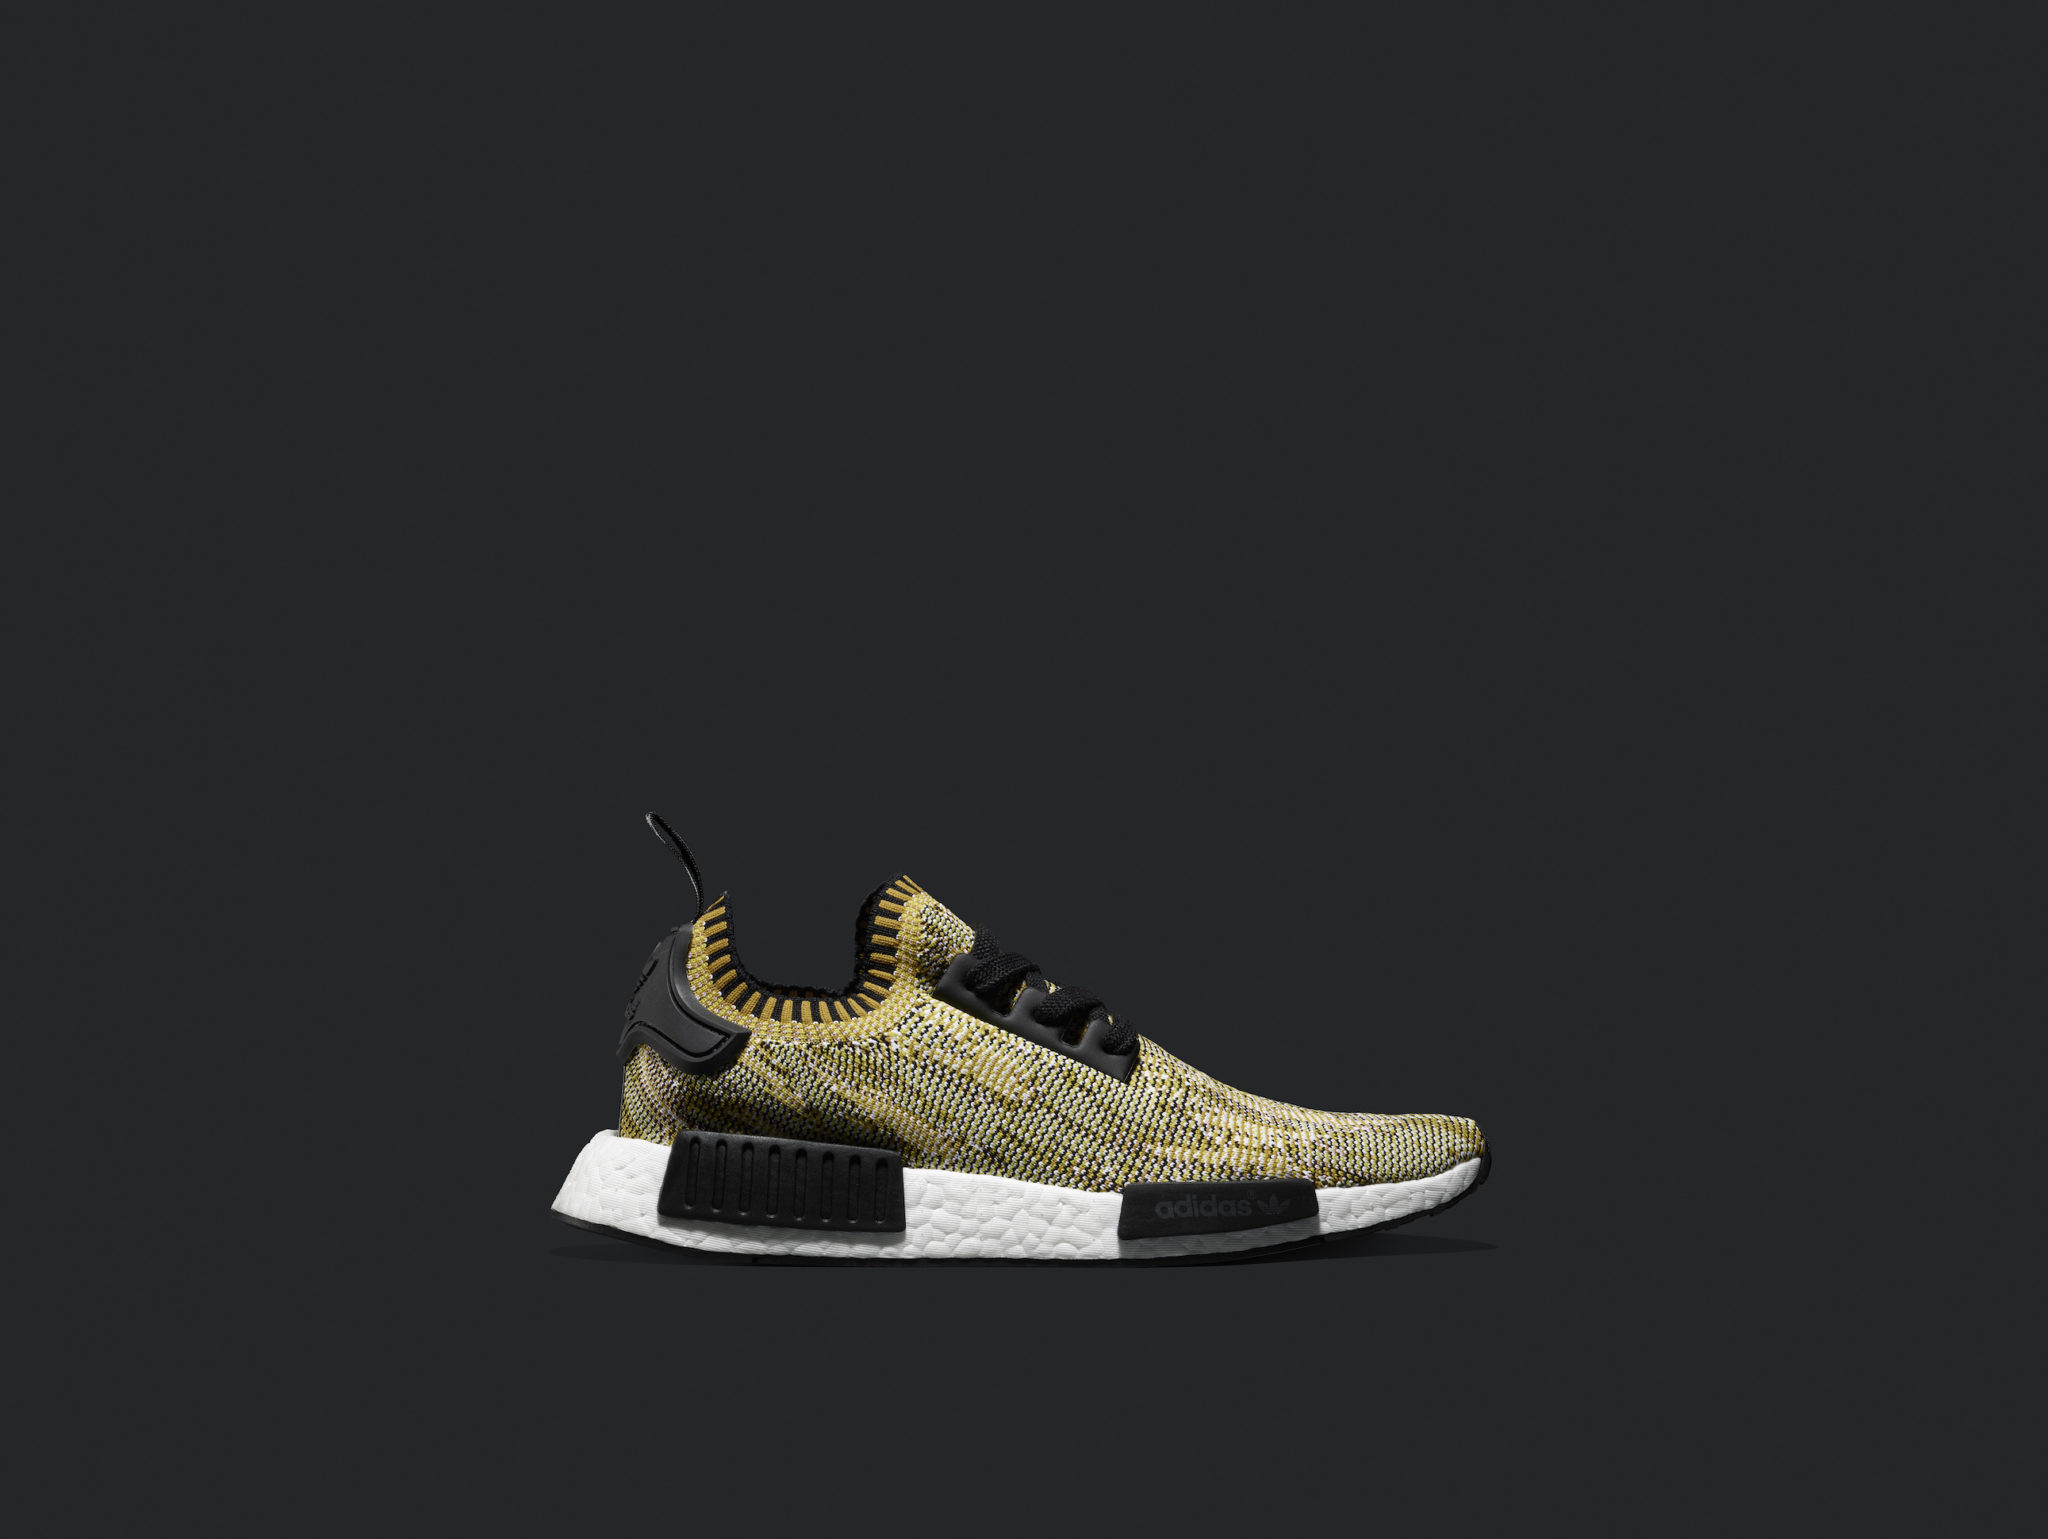 NMD_R1 PRIMEKNIT MARCH RELEASE_1